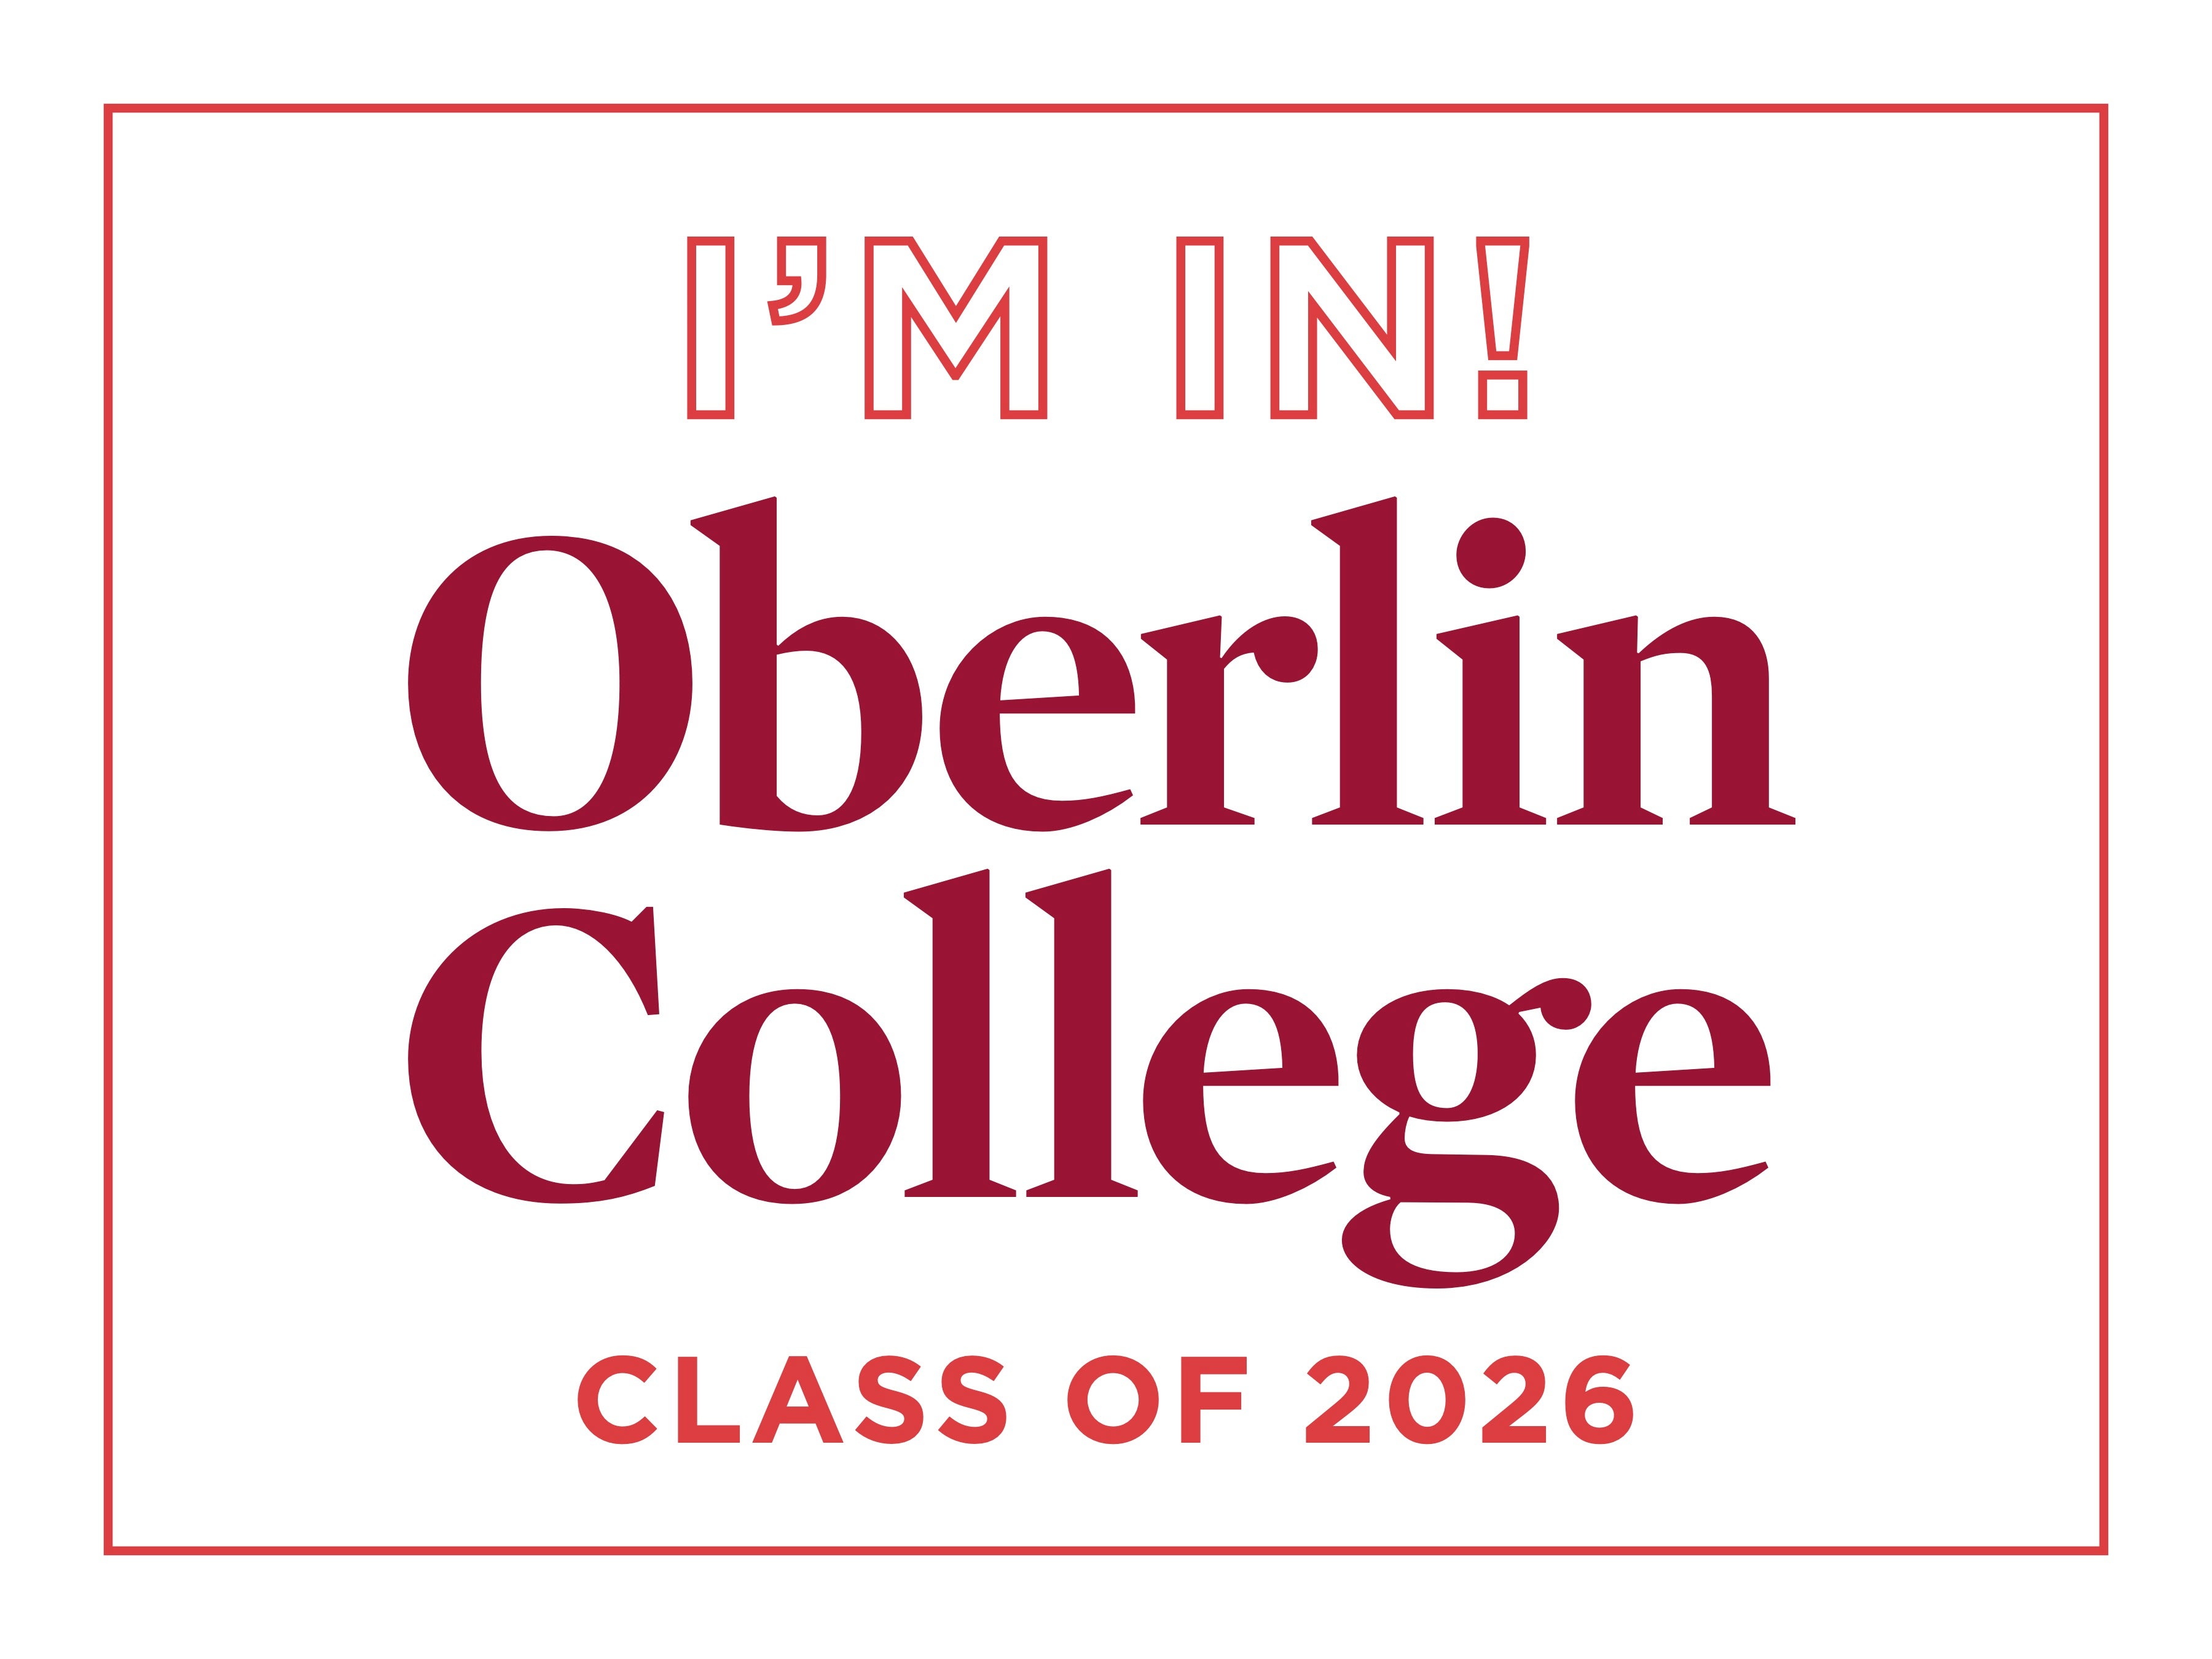 I'm in! Oberlin College Class of 2026 on white background.